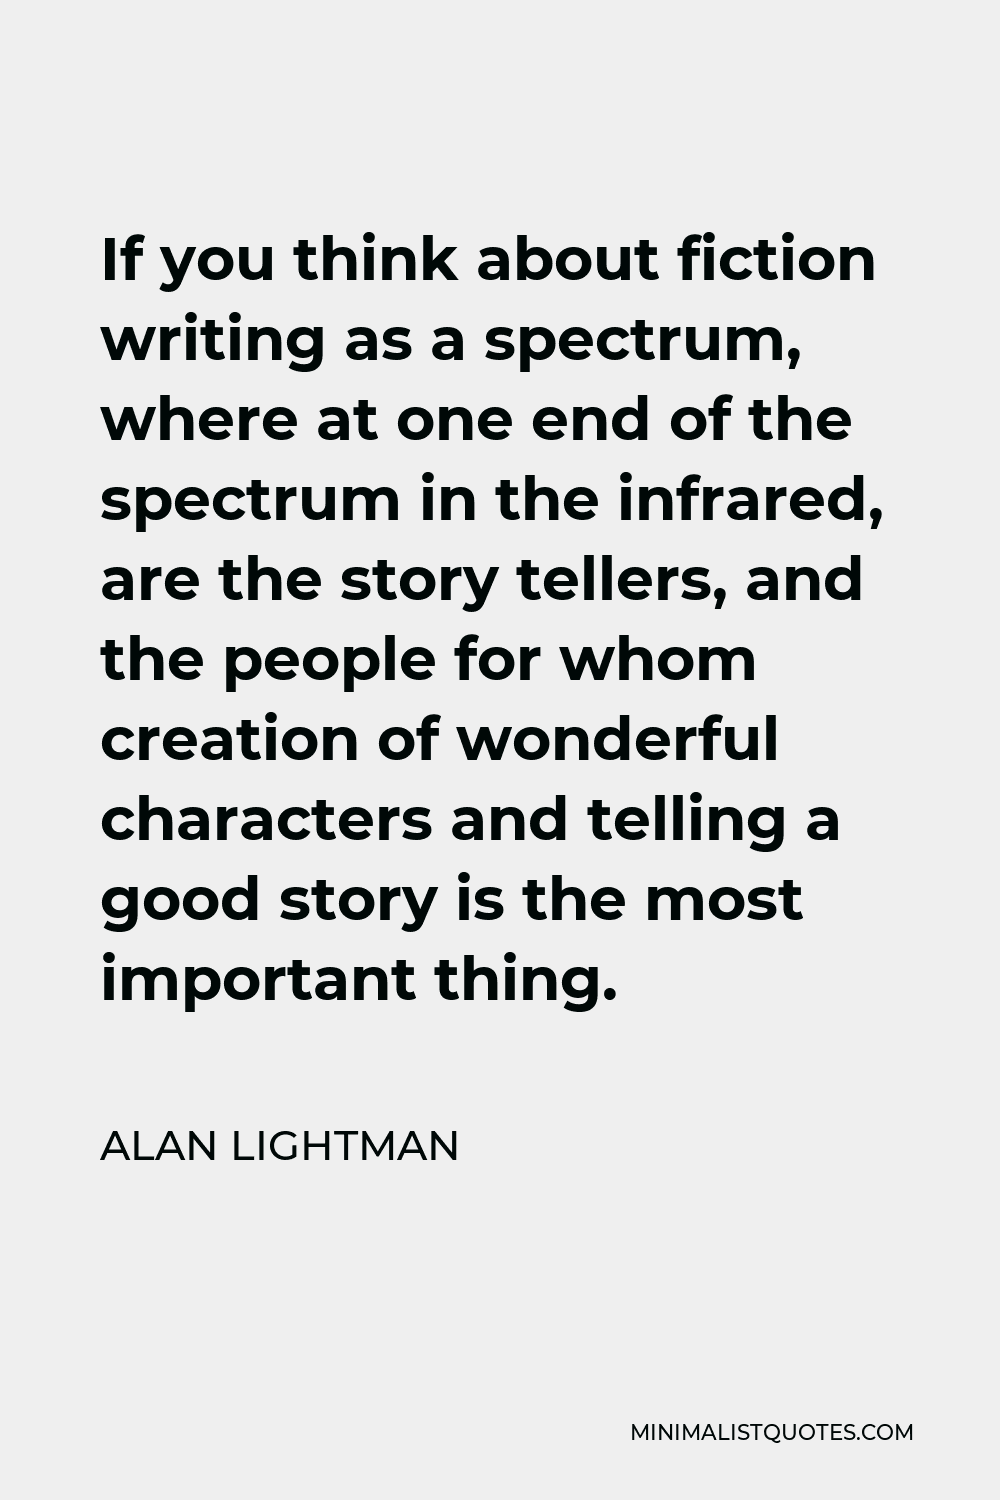 Alan Lightman Quote - If you think about fiction writing as a spectrum, where at one end of the spectrum in the infrared, are the story tellers, and the people for whom creation of wonderful characters and telling a good story is the most important thing.